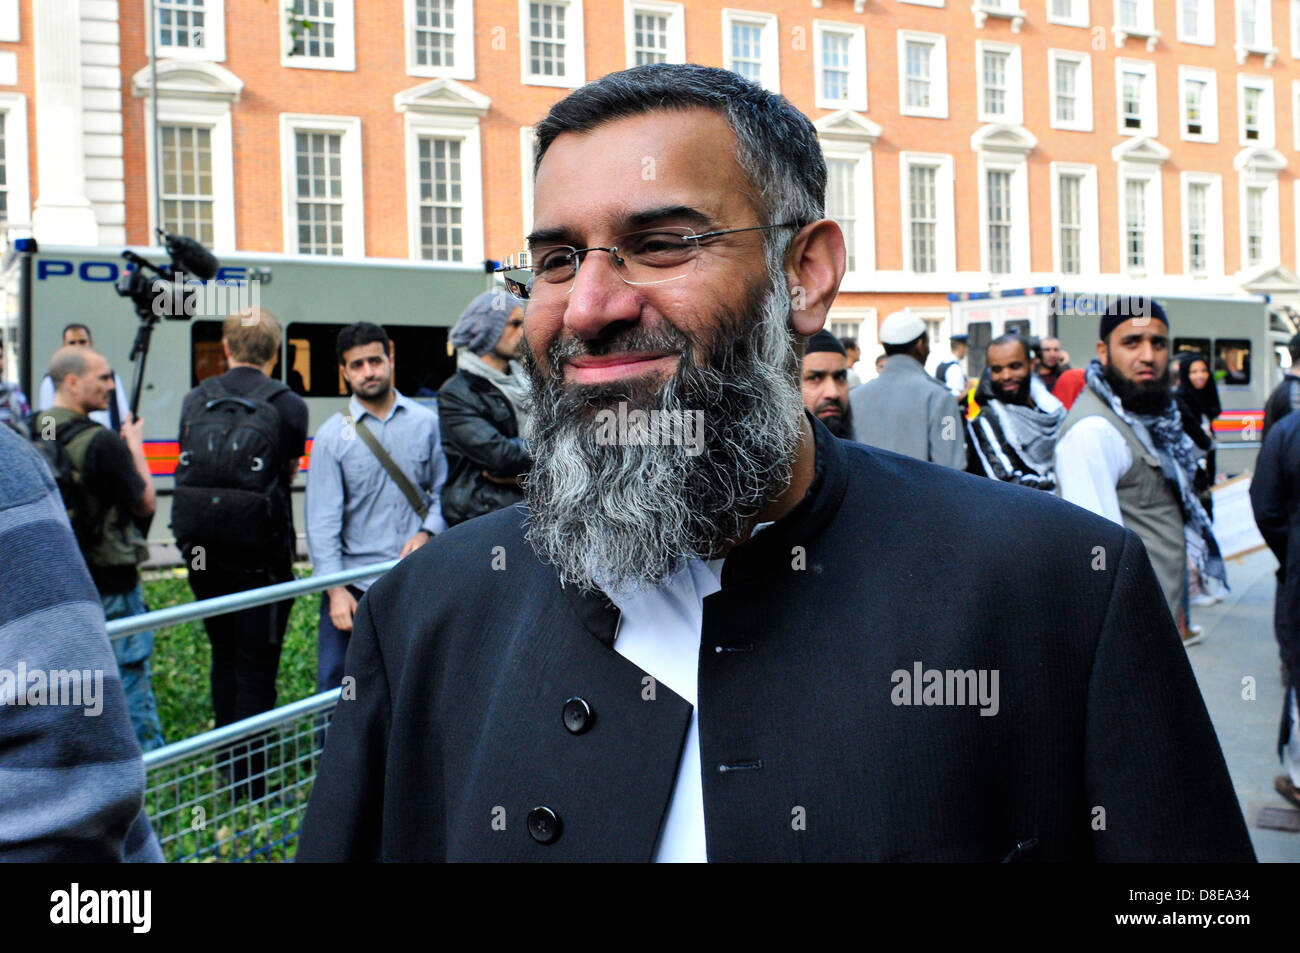 The Radical Islamist Anjem Choudary at a protest outside the US Embassy in London, UK. Stock Photo